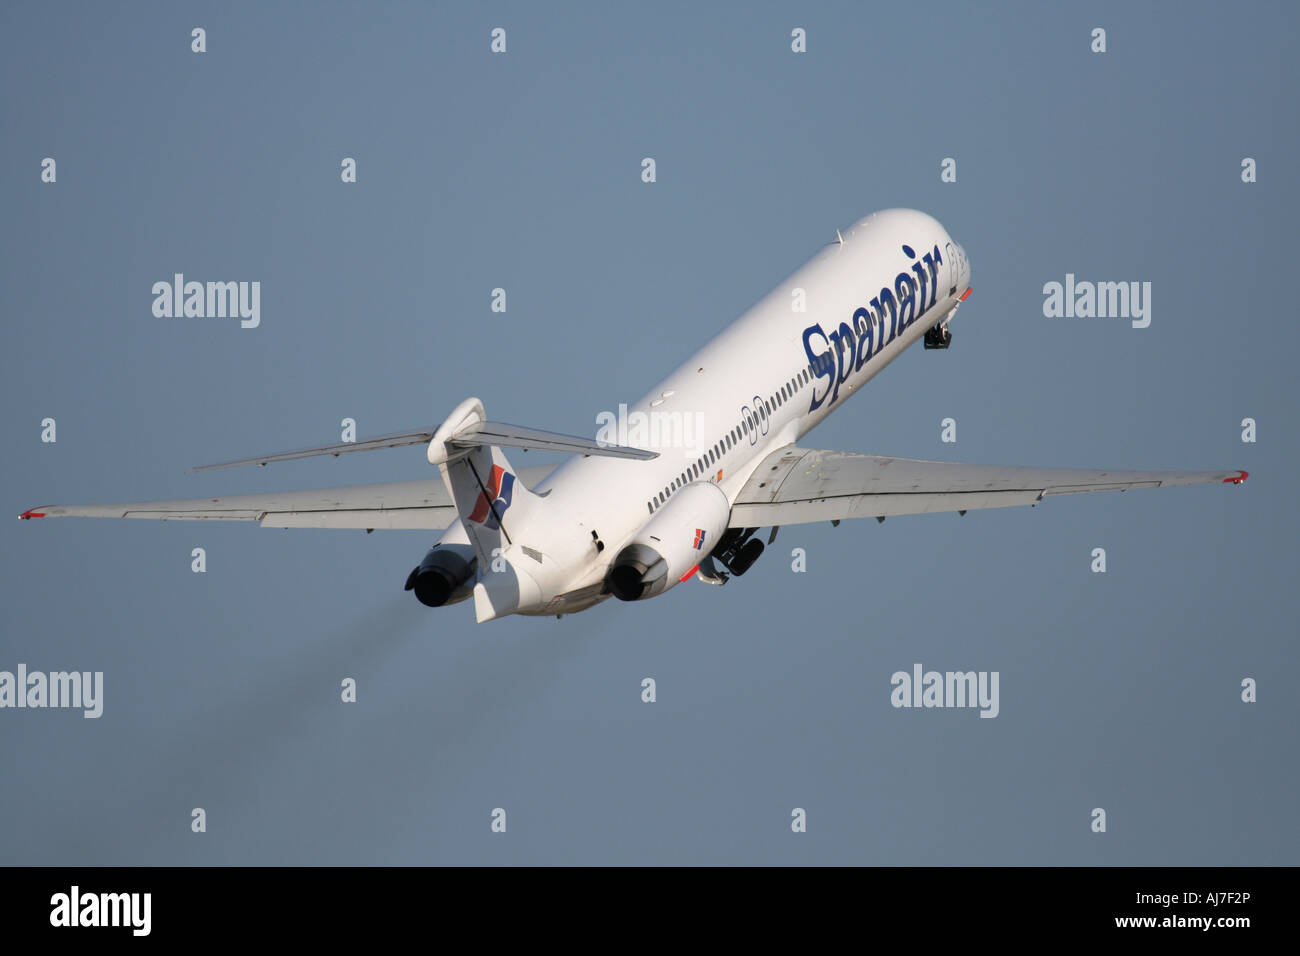 Spanair McDonnell Douglas MD-83 trailing exhaust on departure Stock Photo